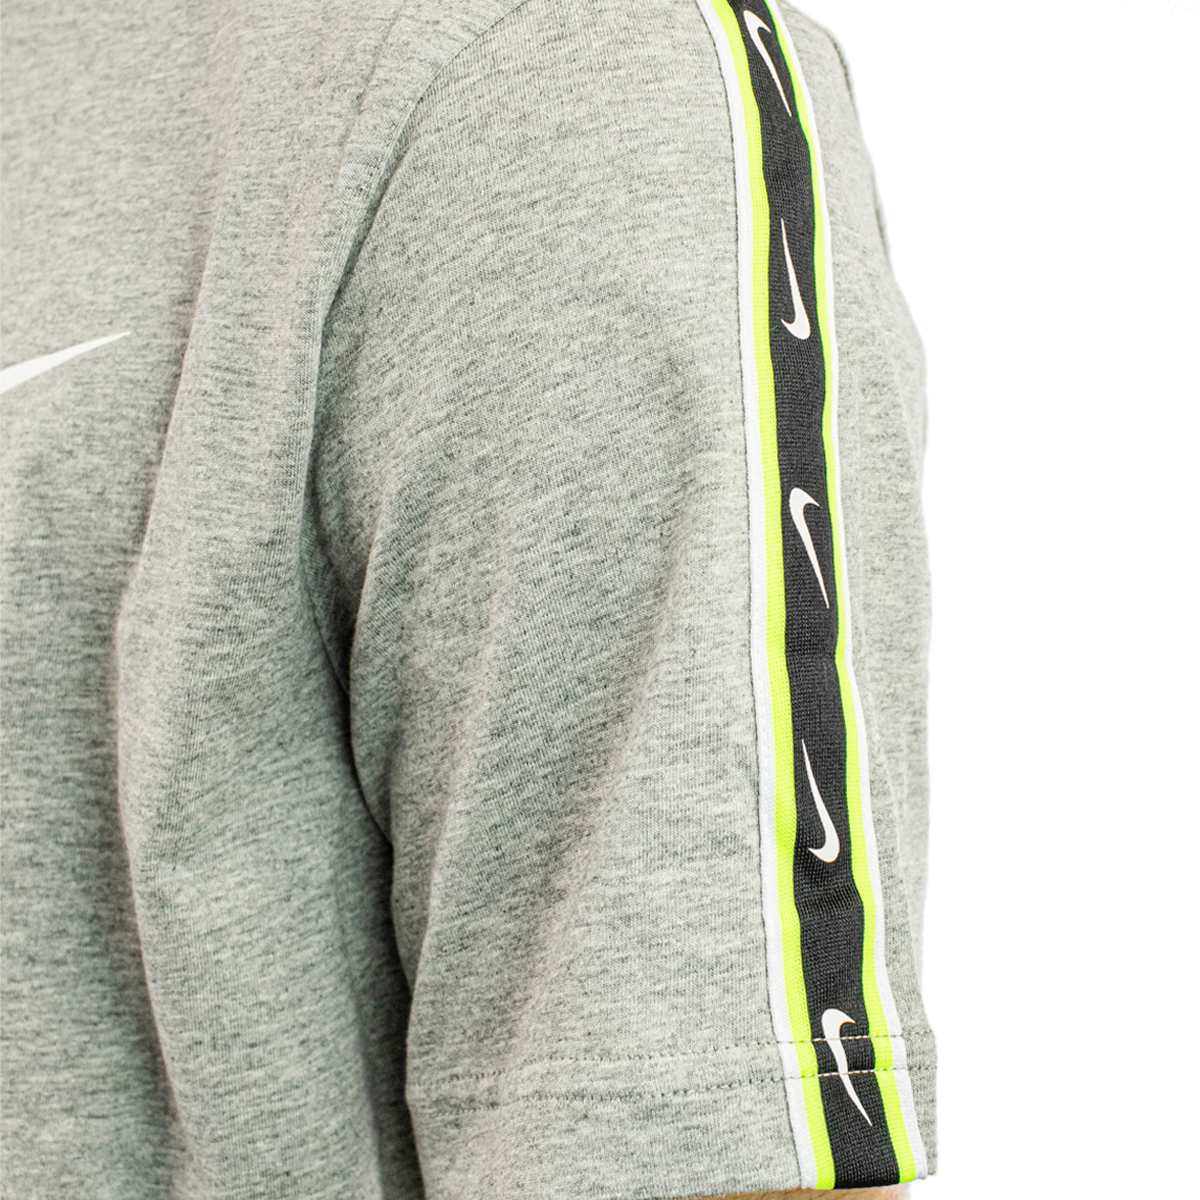 Nike Repeat SW T-Shirt DX2032-066-